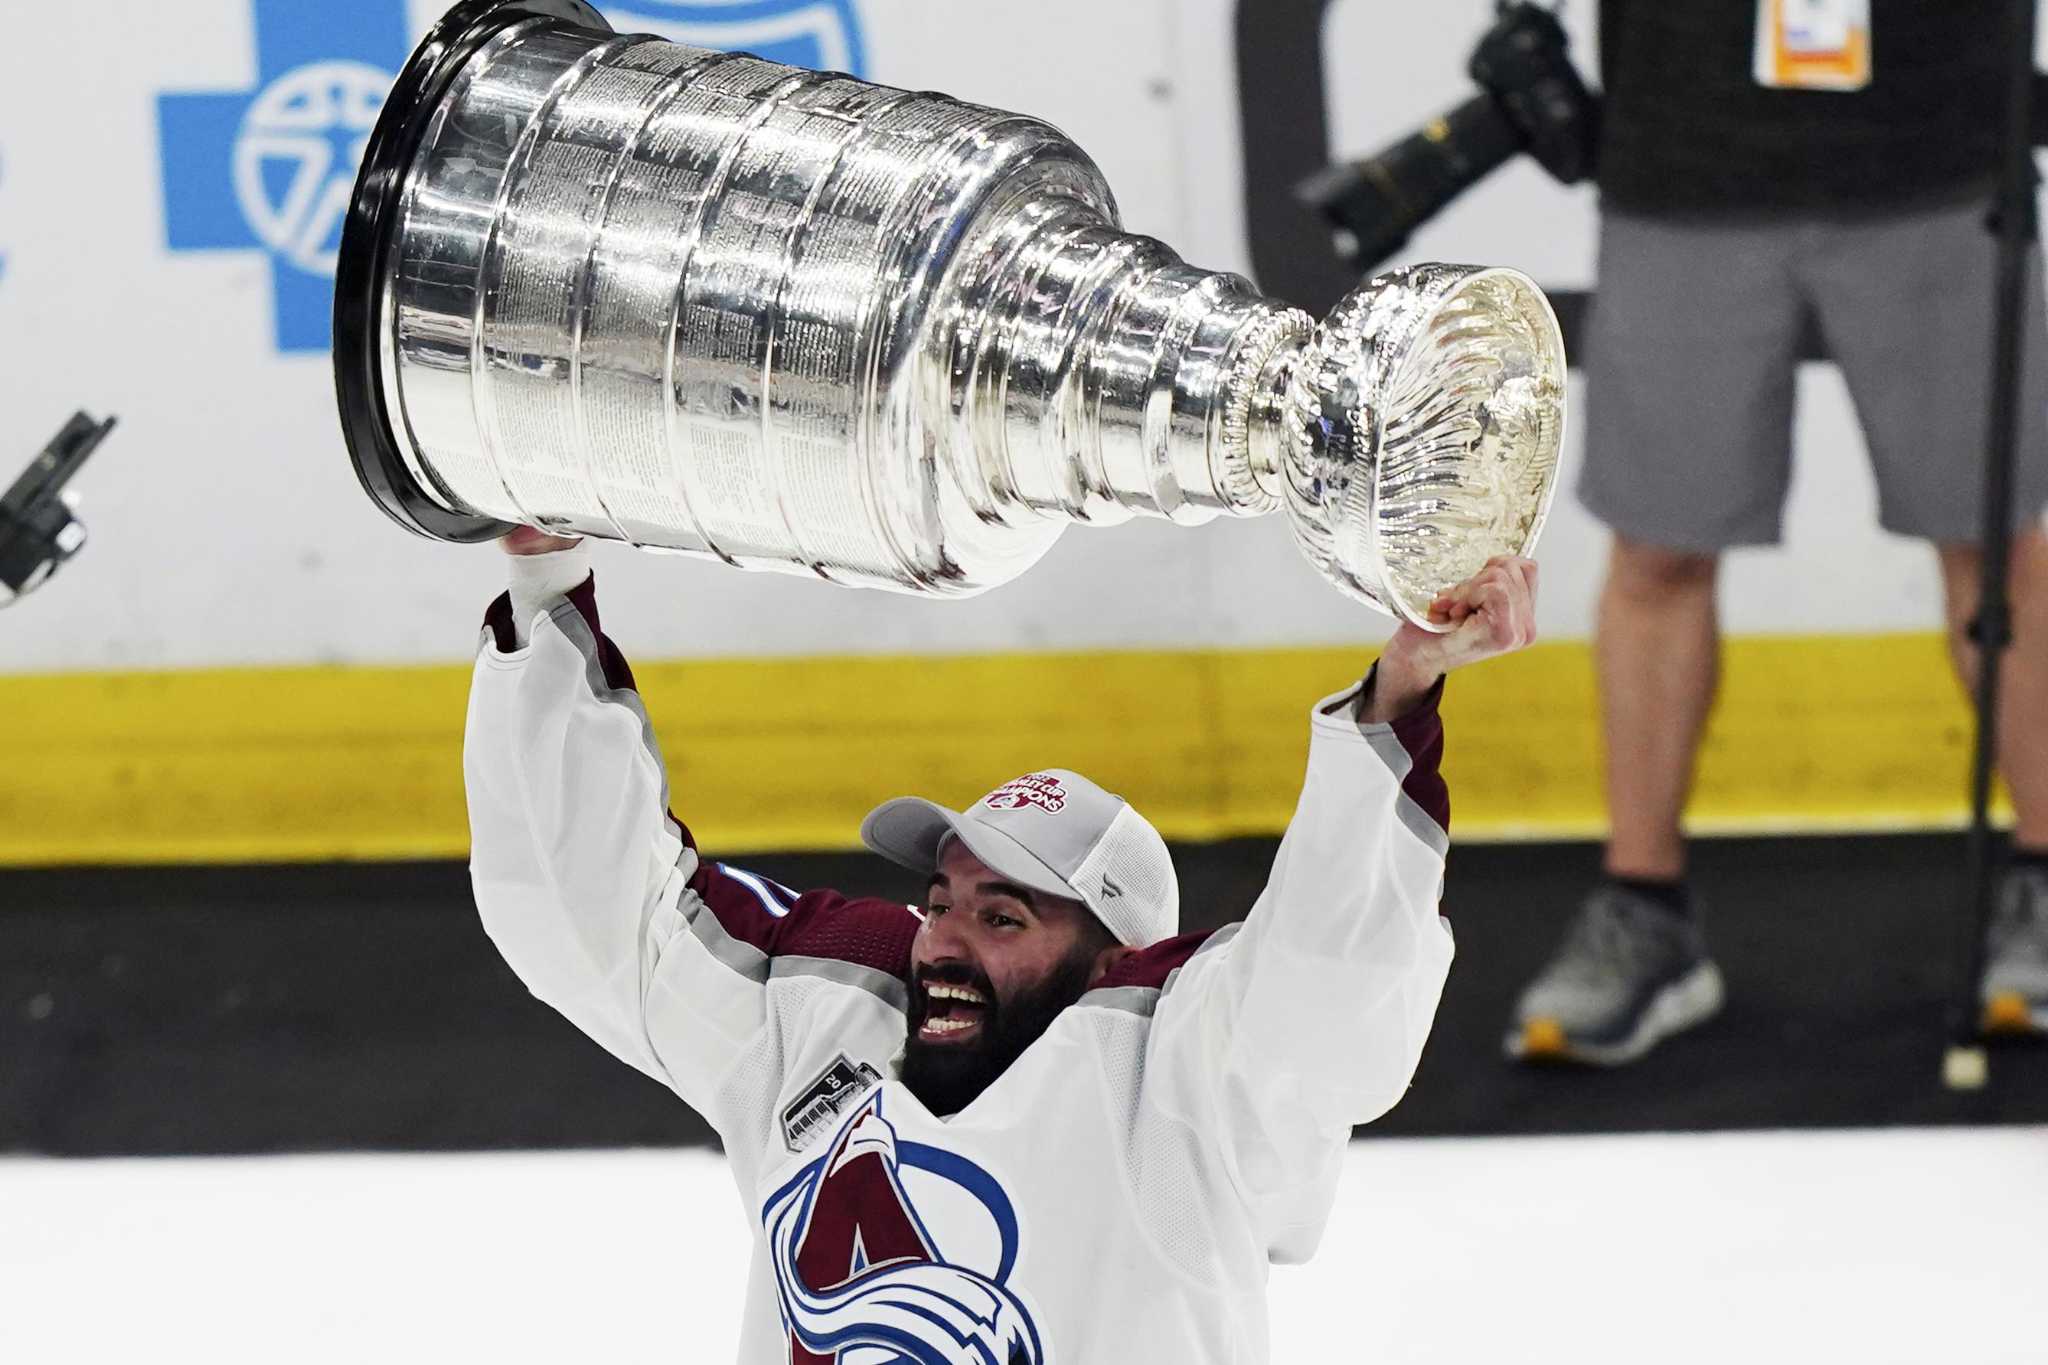 Joe Sakic captained Avalanche to two Stanley Cup wins 